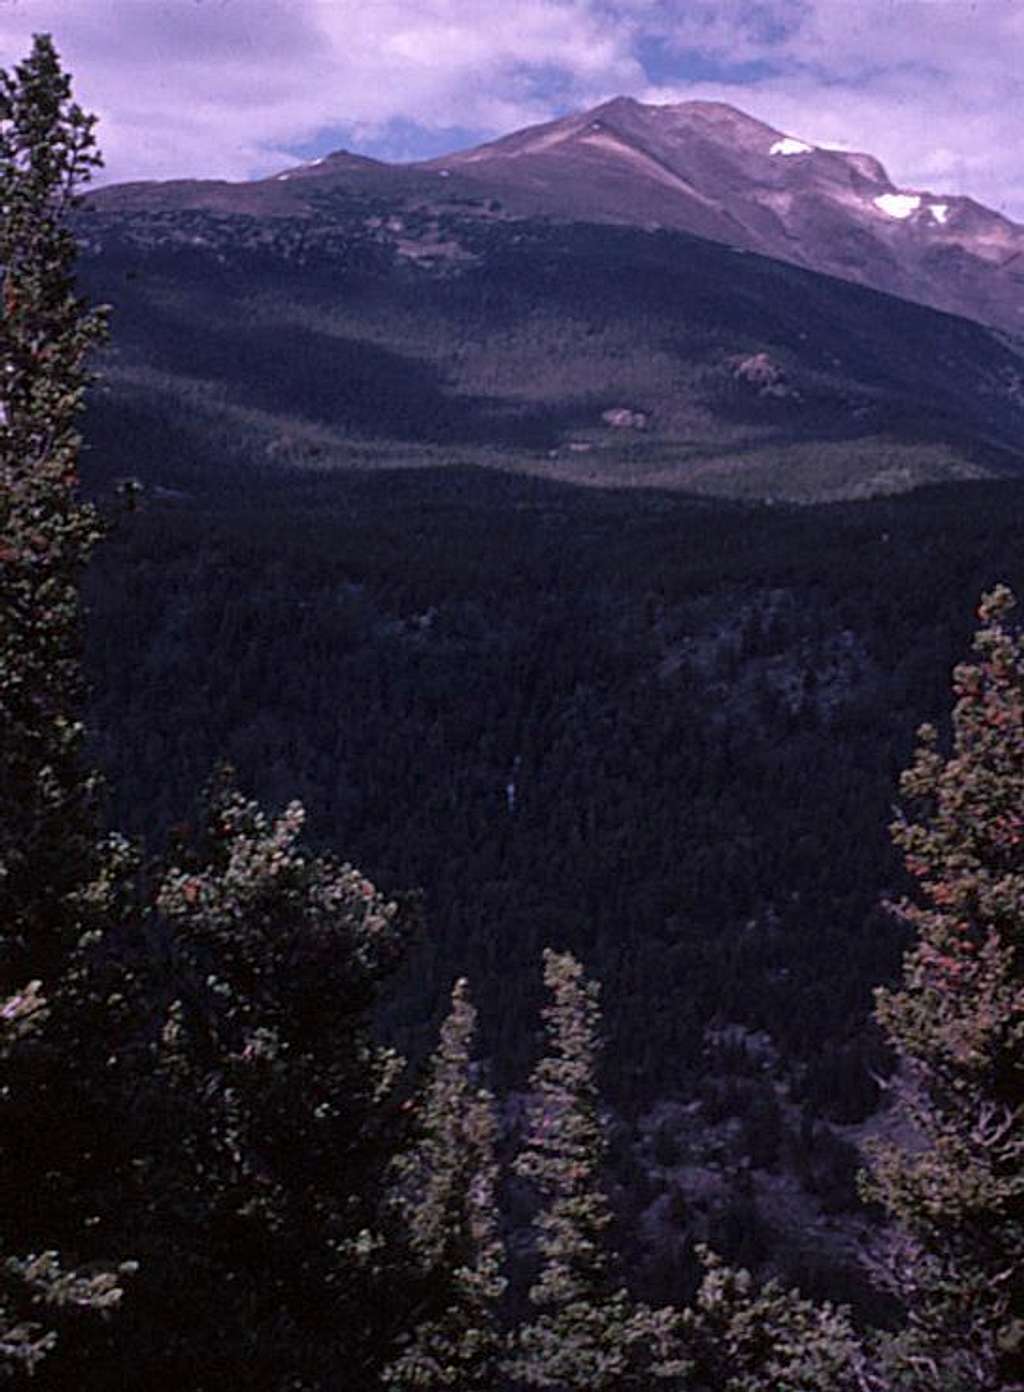 Rocky Mtn High 1975 - On the trail to Ouzel Falls